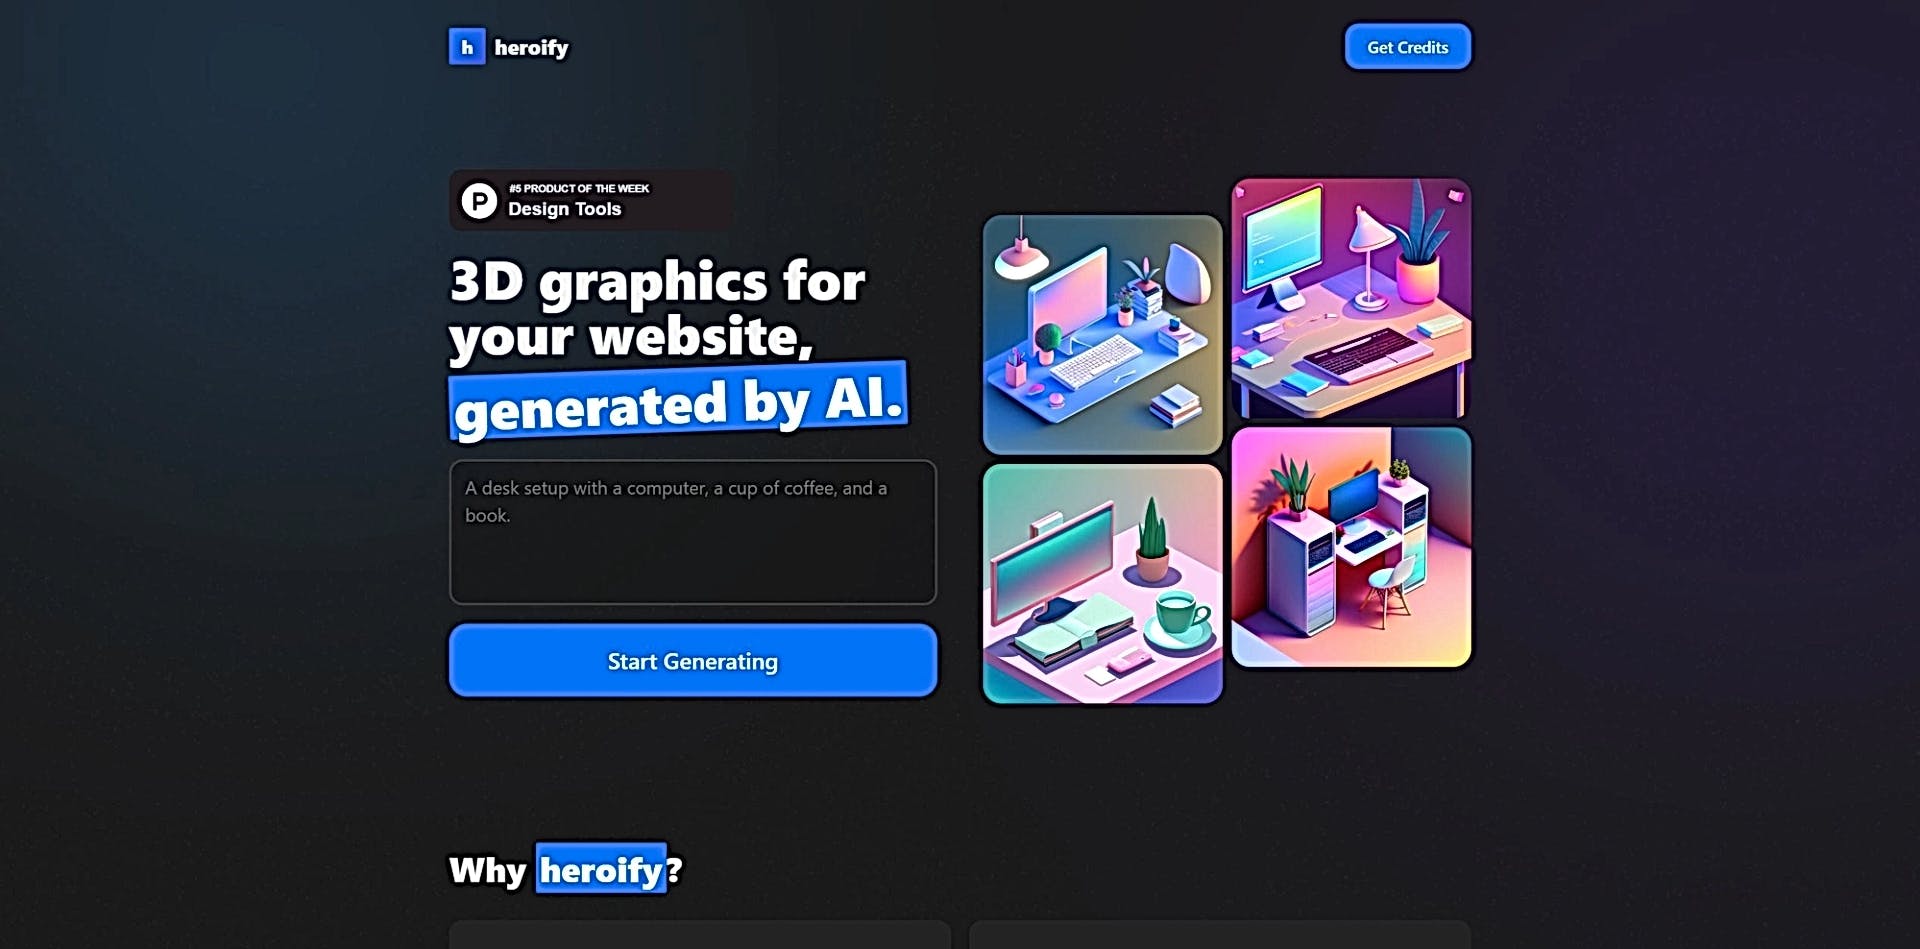 Heroify featured